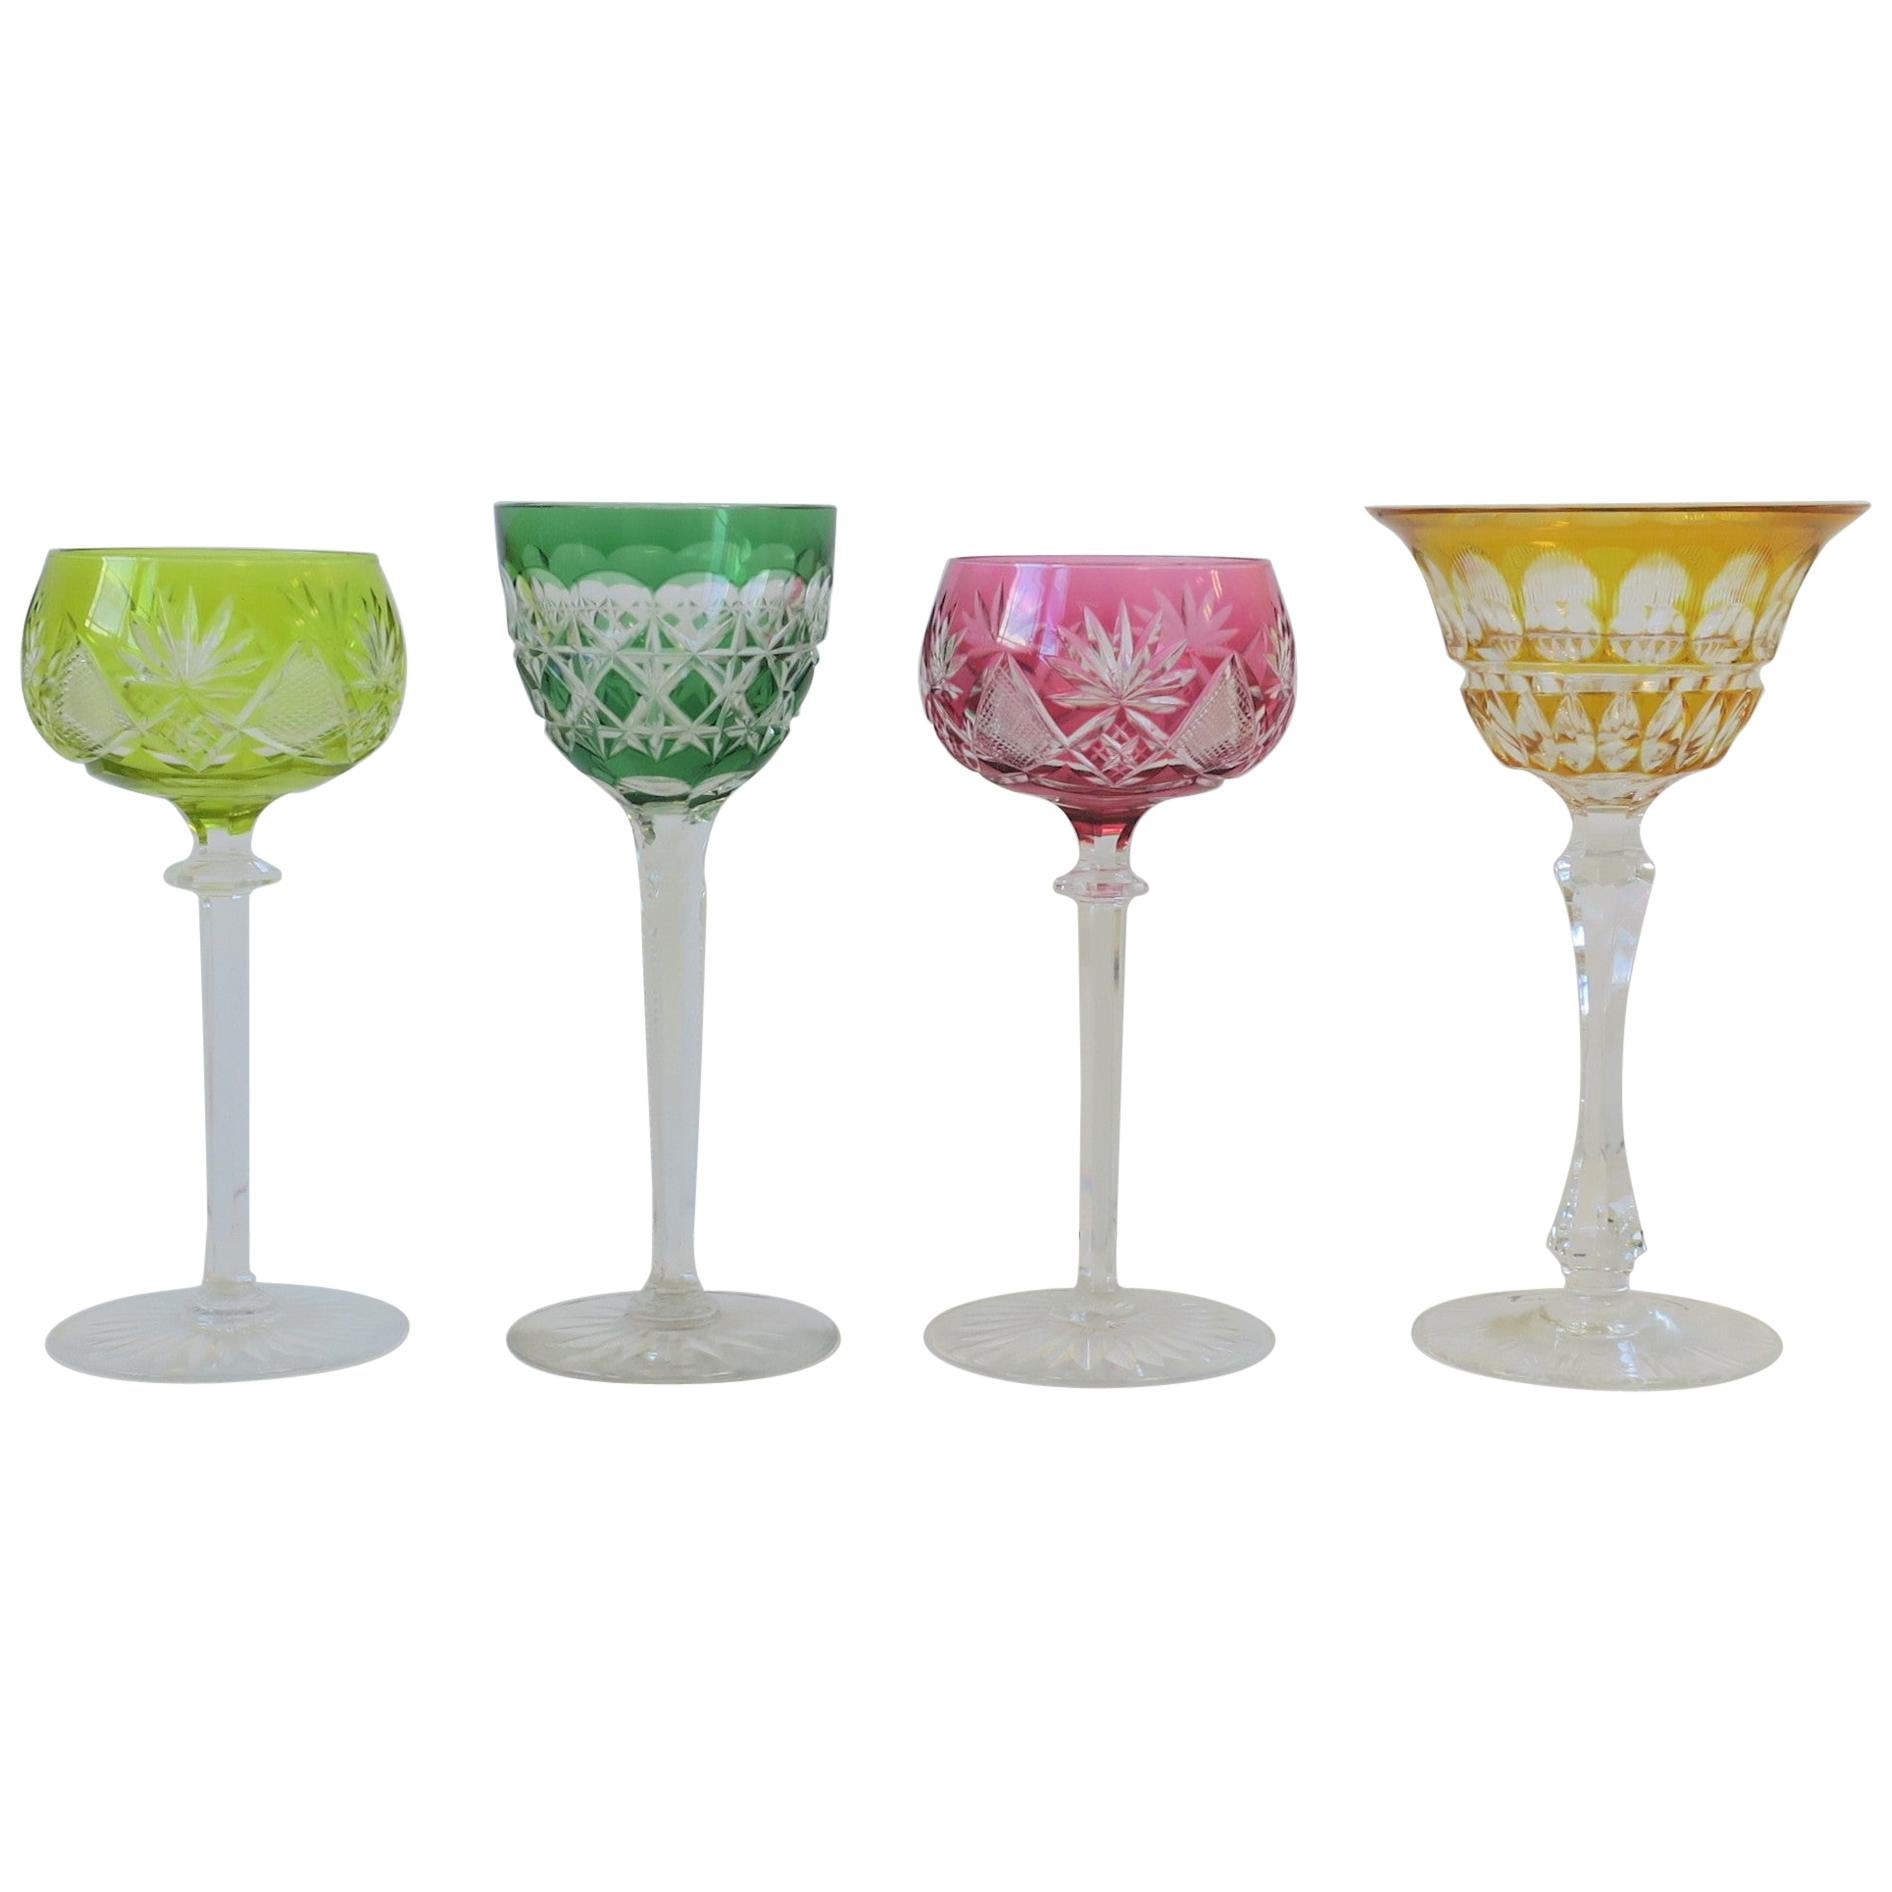 Euro Czech Bohemian Crystal Wine or Cocktail Glasses